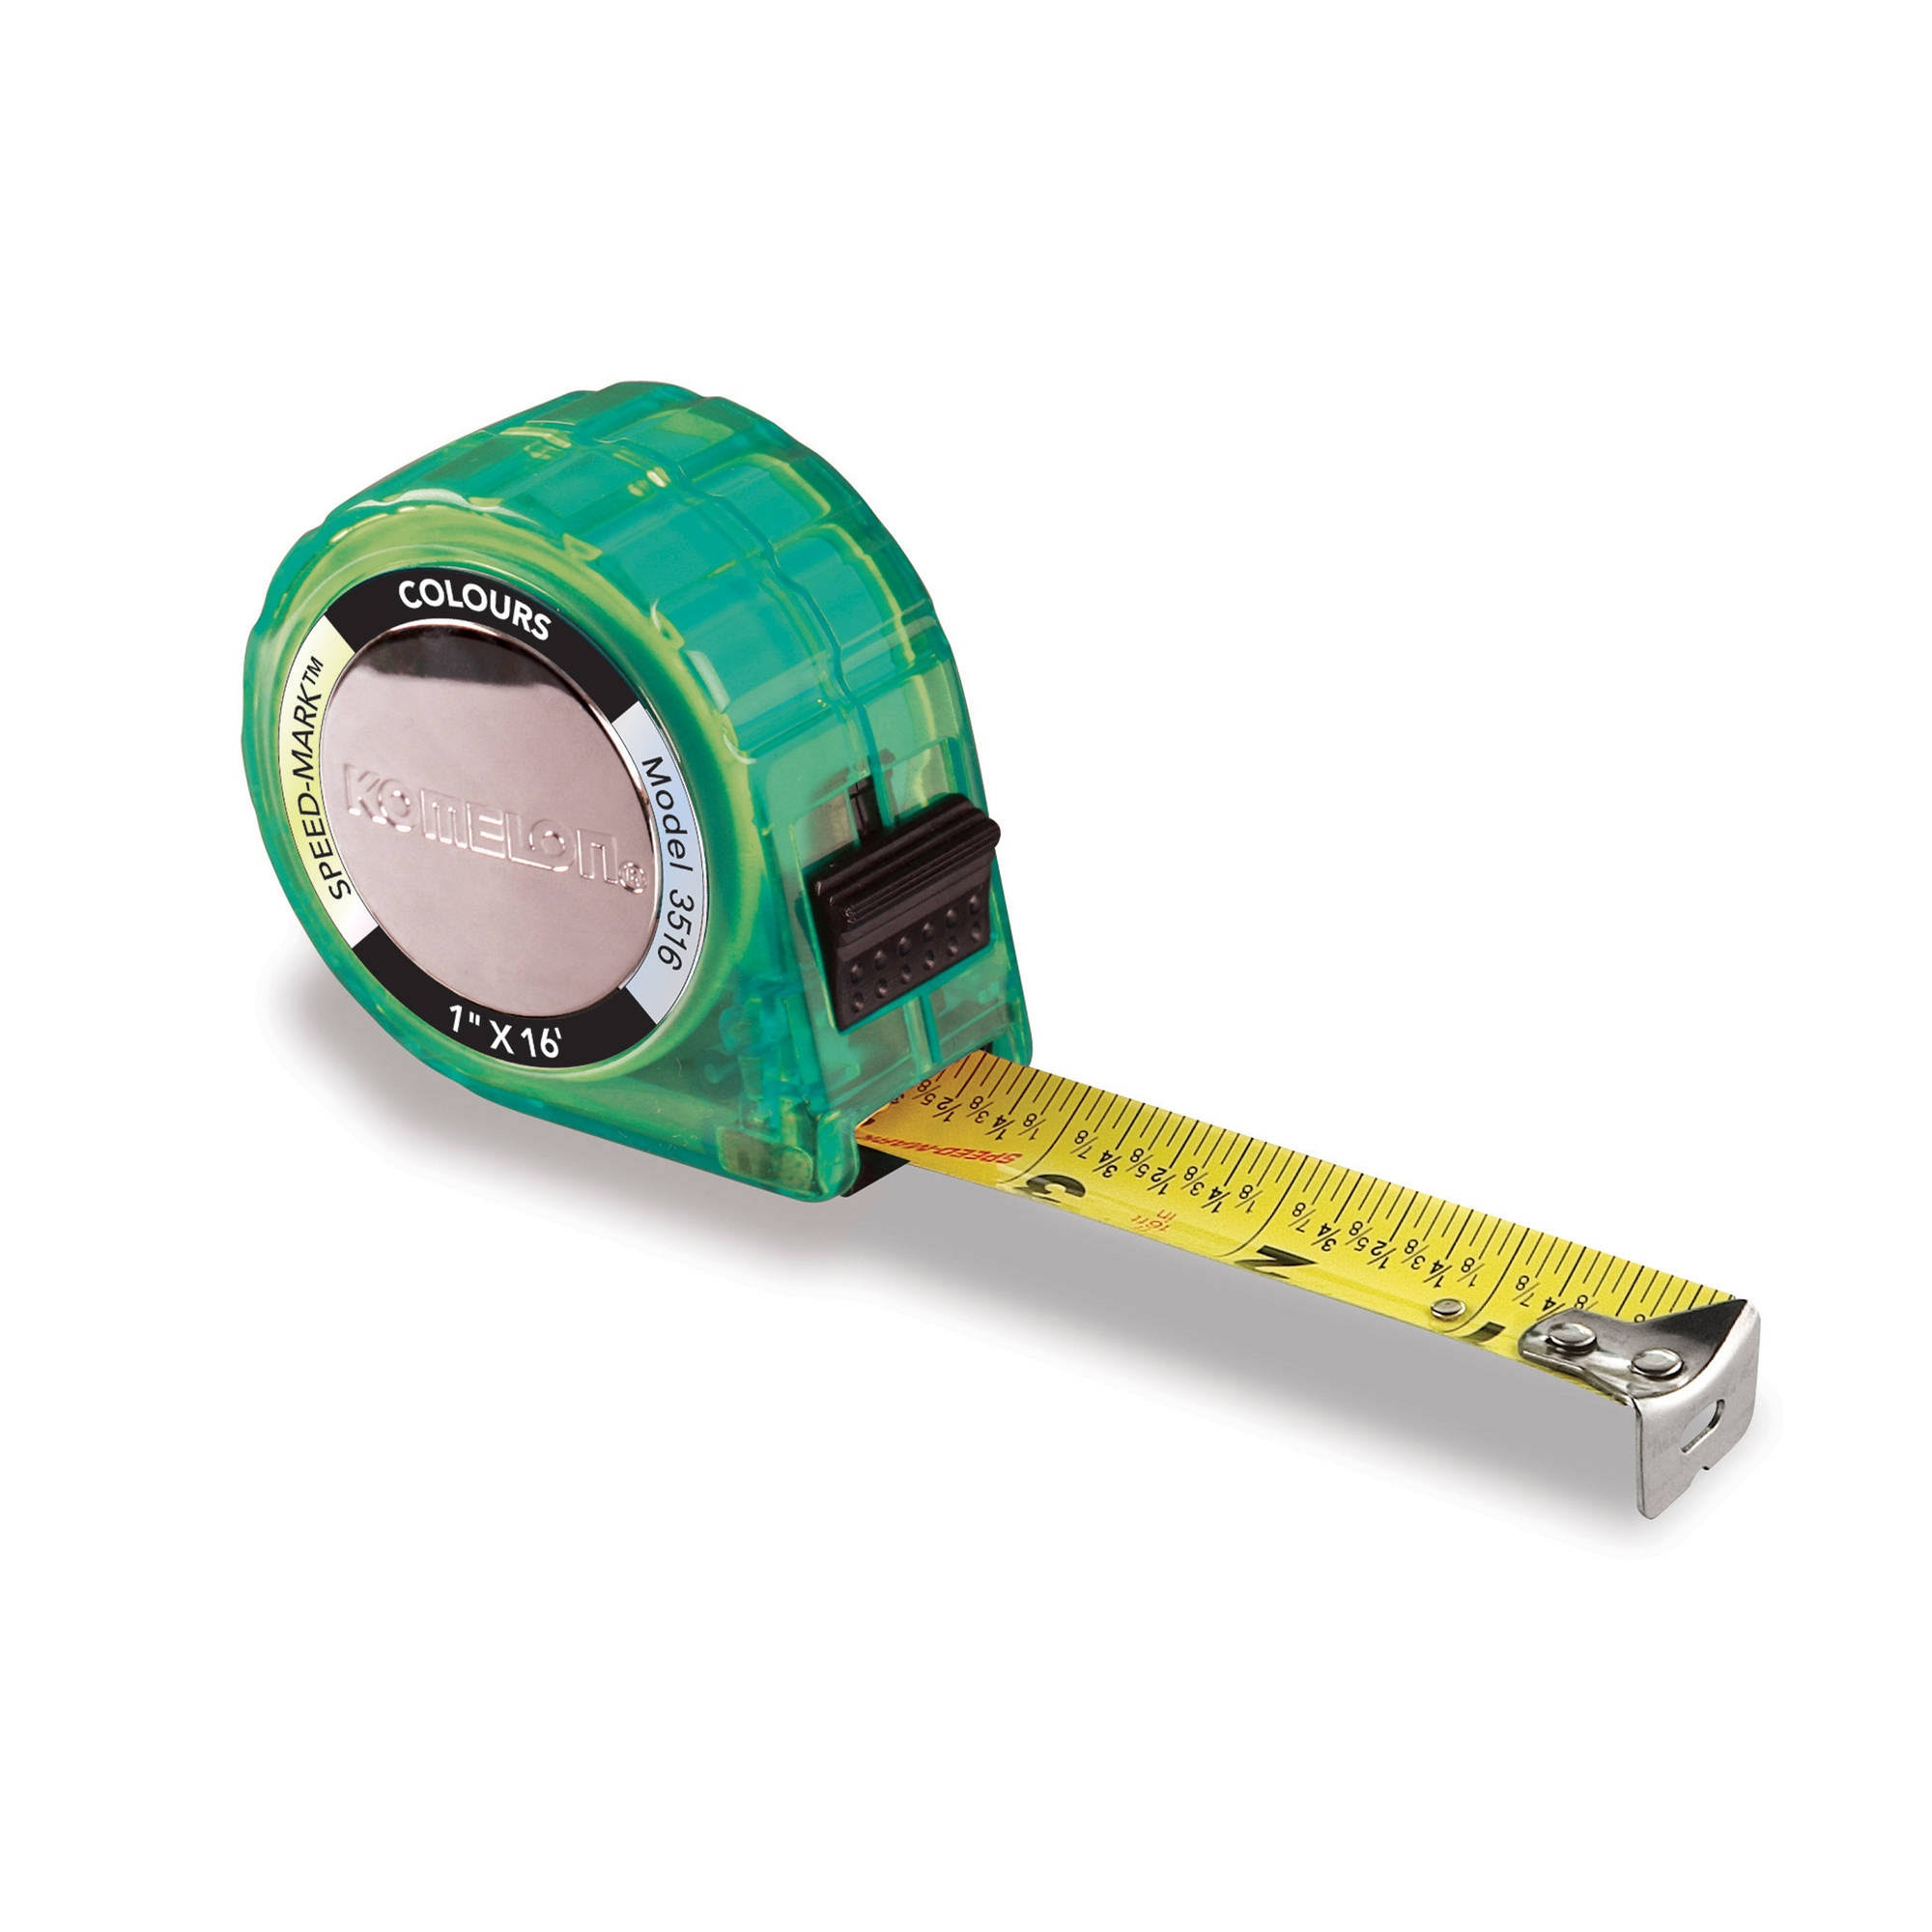 Komelon Colours Tape Measure with Acrylic Coated Steel Blade - 16ft x 1in, Assorted Colors